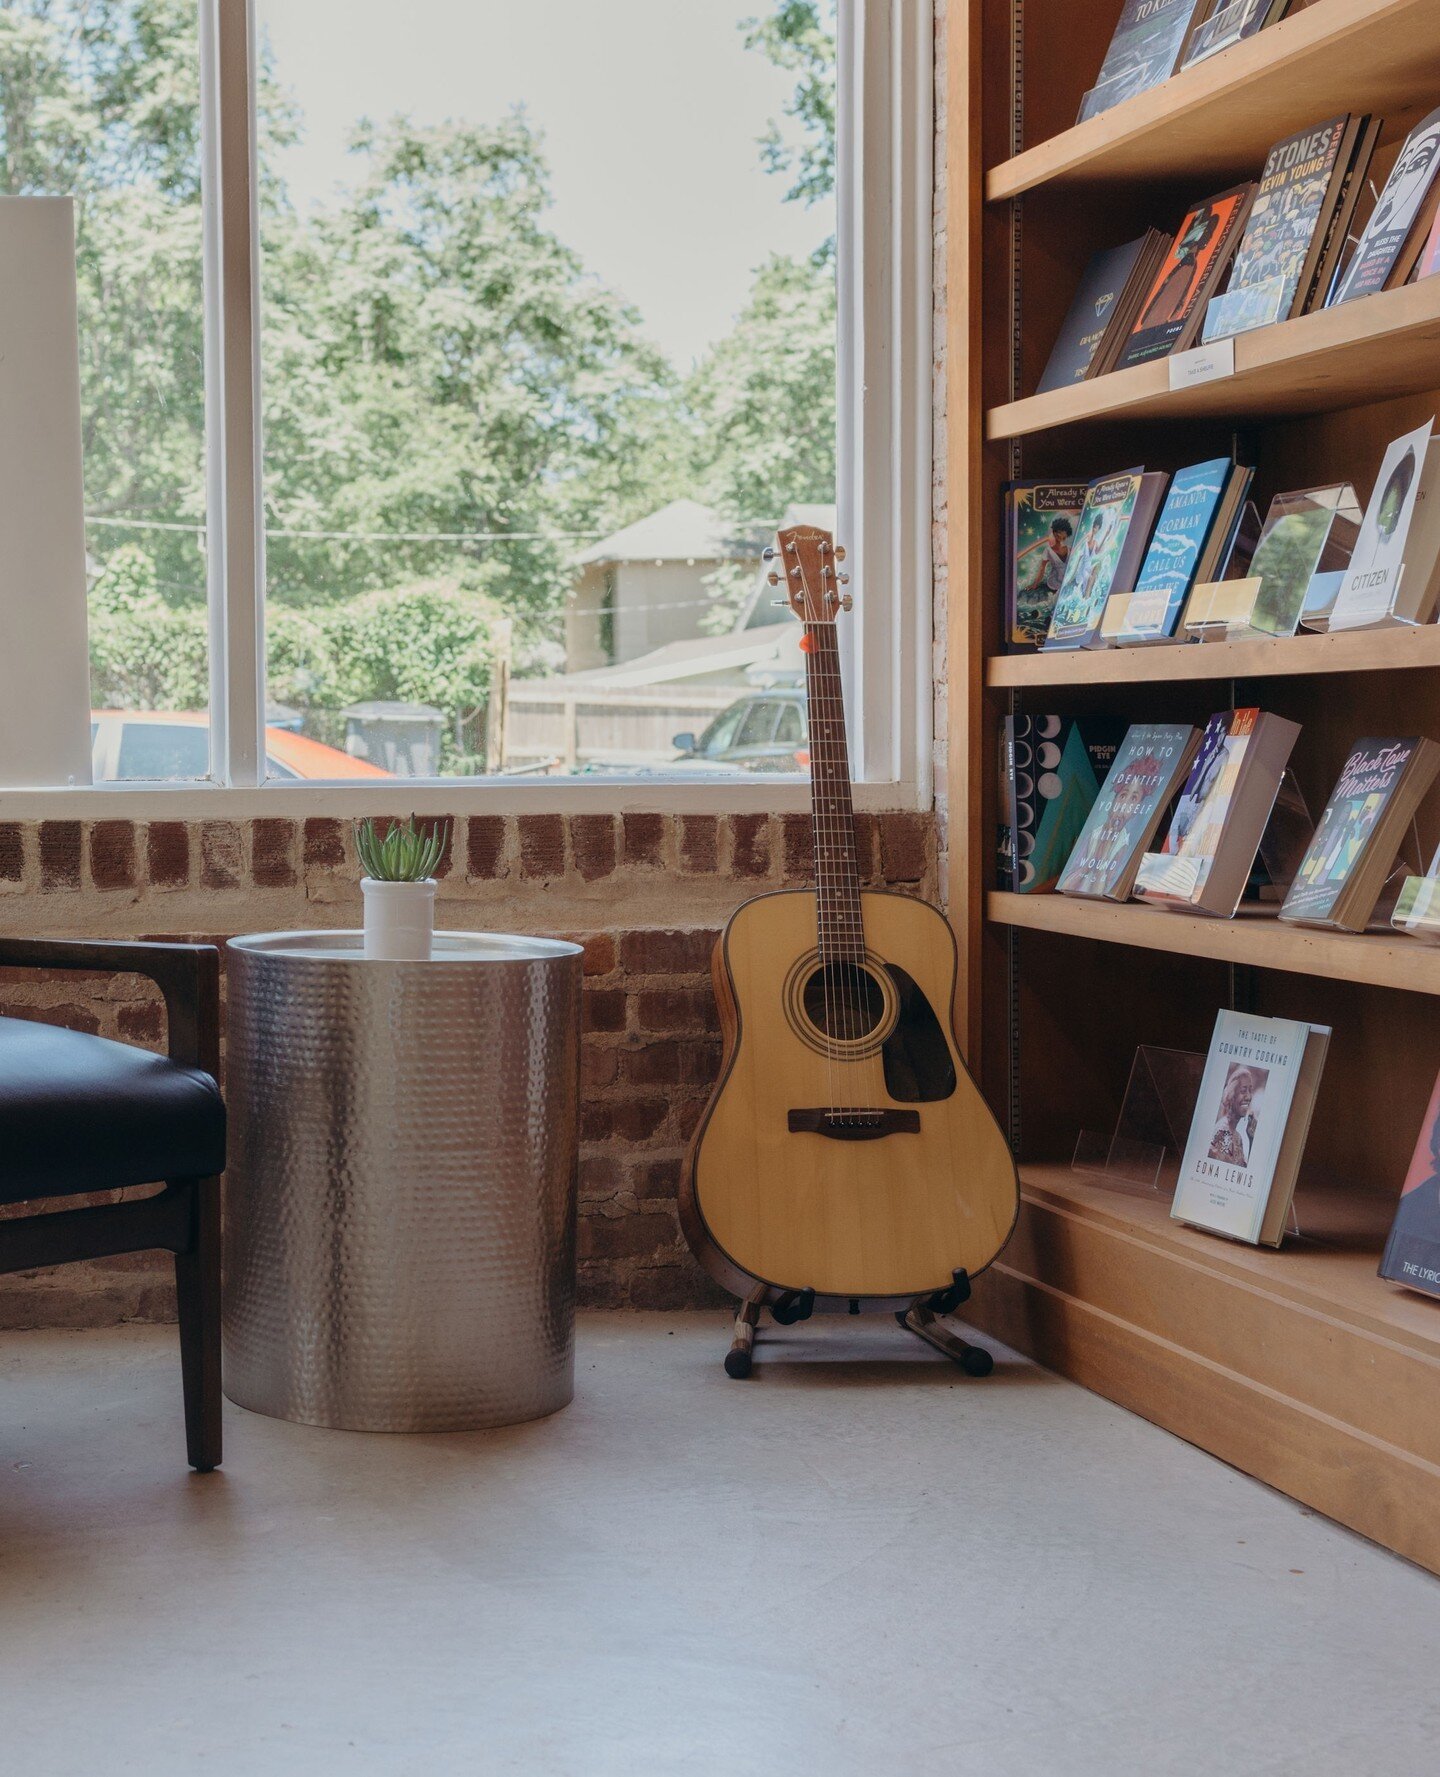 MISSING ALERT!!🚨🚨 ⁠
⁠
Y'all, we need help locating our beautiful guitar! It appears to be missing. If it accidentally sneaked inside your book on the way out please return it. We promise to not ask any questions... we all know how guitars can be. ⁠